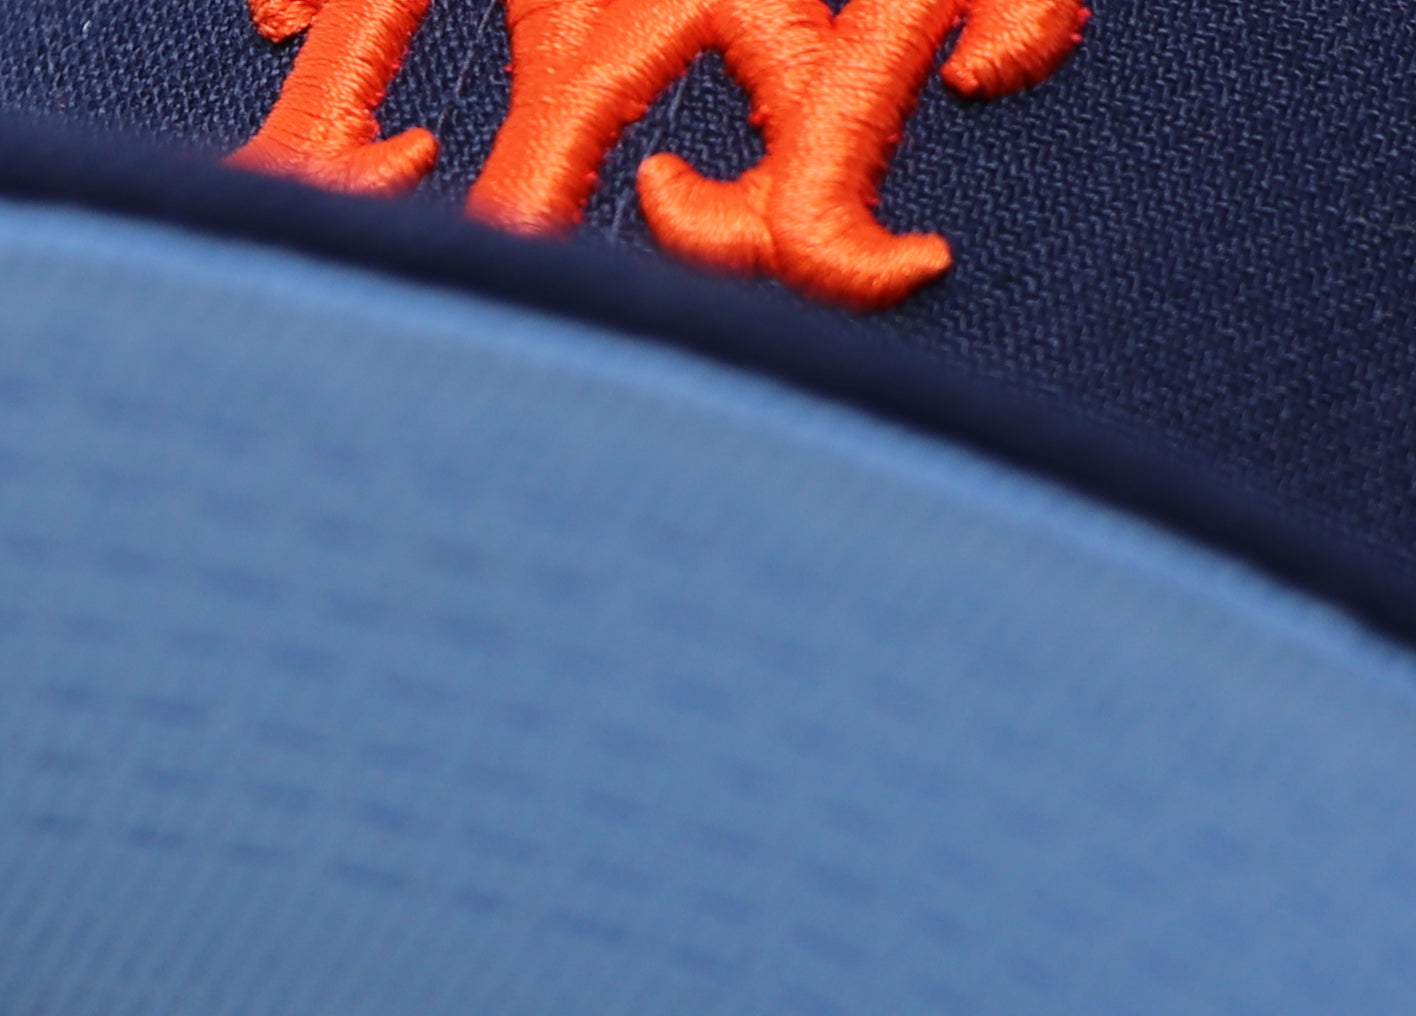 NEW YORK METS (NAVY) (2008 ASG) "REVERSE RIVALRY" NEW ERA 59FIFTY FITTED (SKYBLUE BOTTOM)